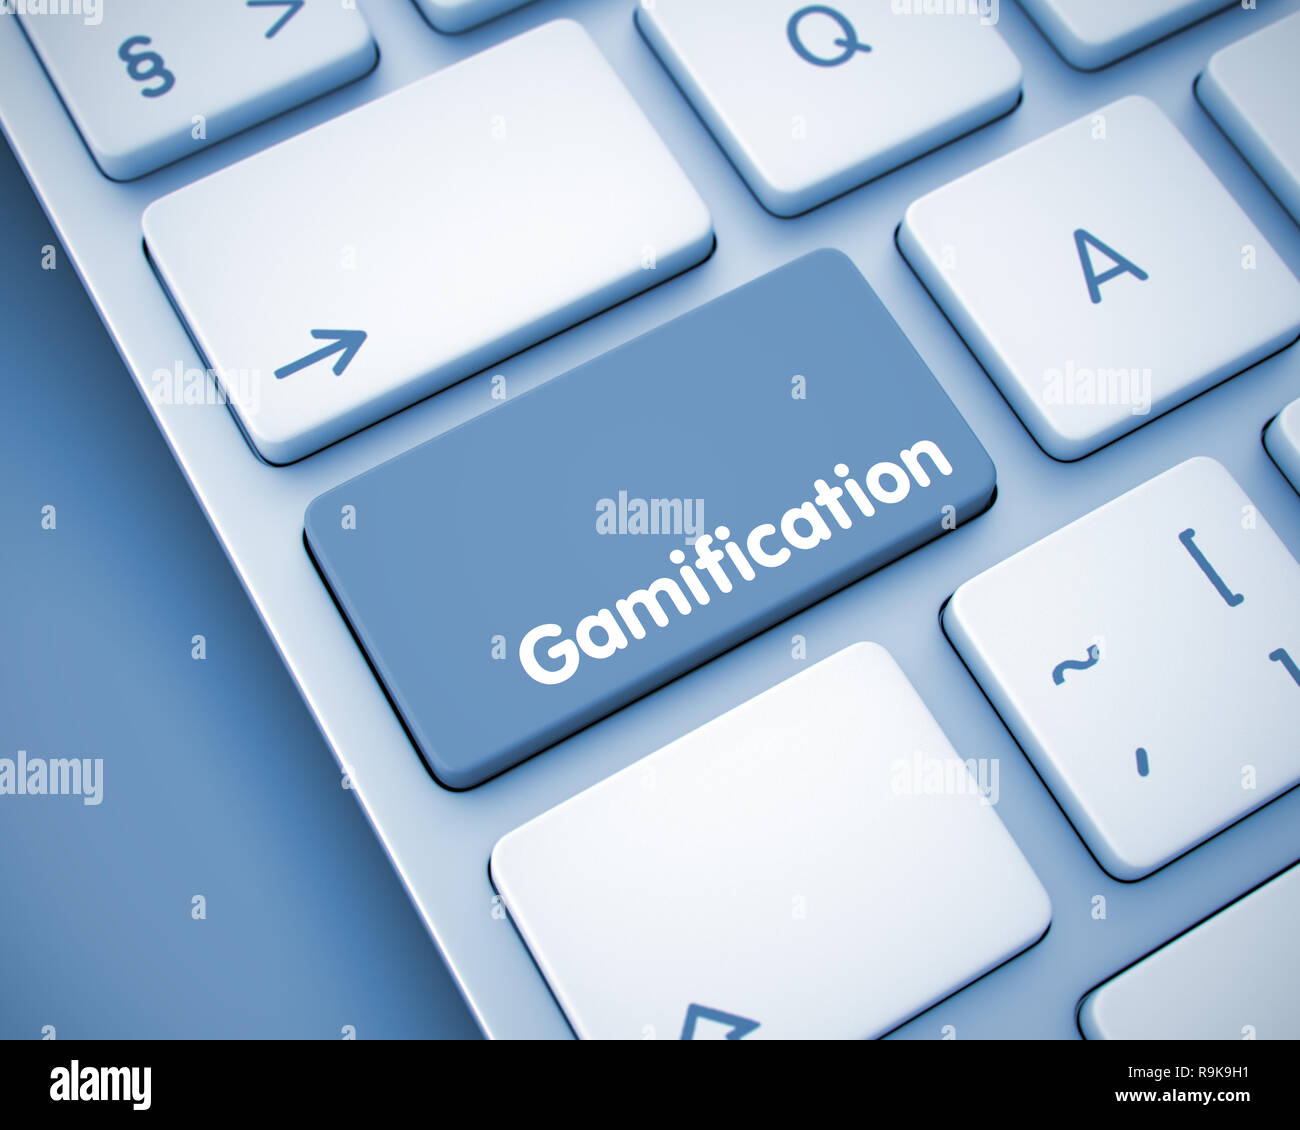 Modern Keyboard with Gamification Button. High Quality Render of a Modern Keyboard Key. The Button is in Color and there is Message Gamification on It Stock Photo